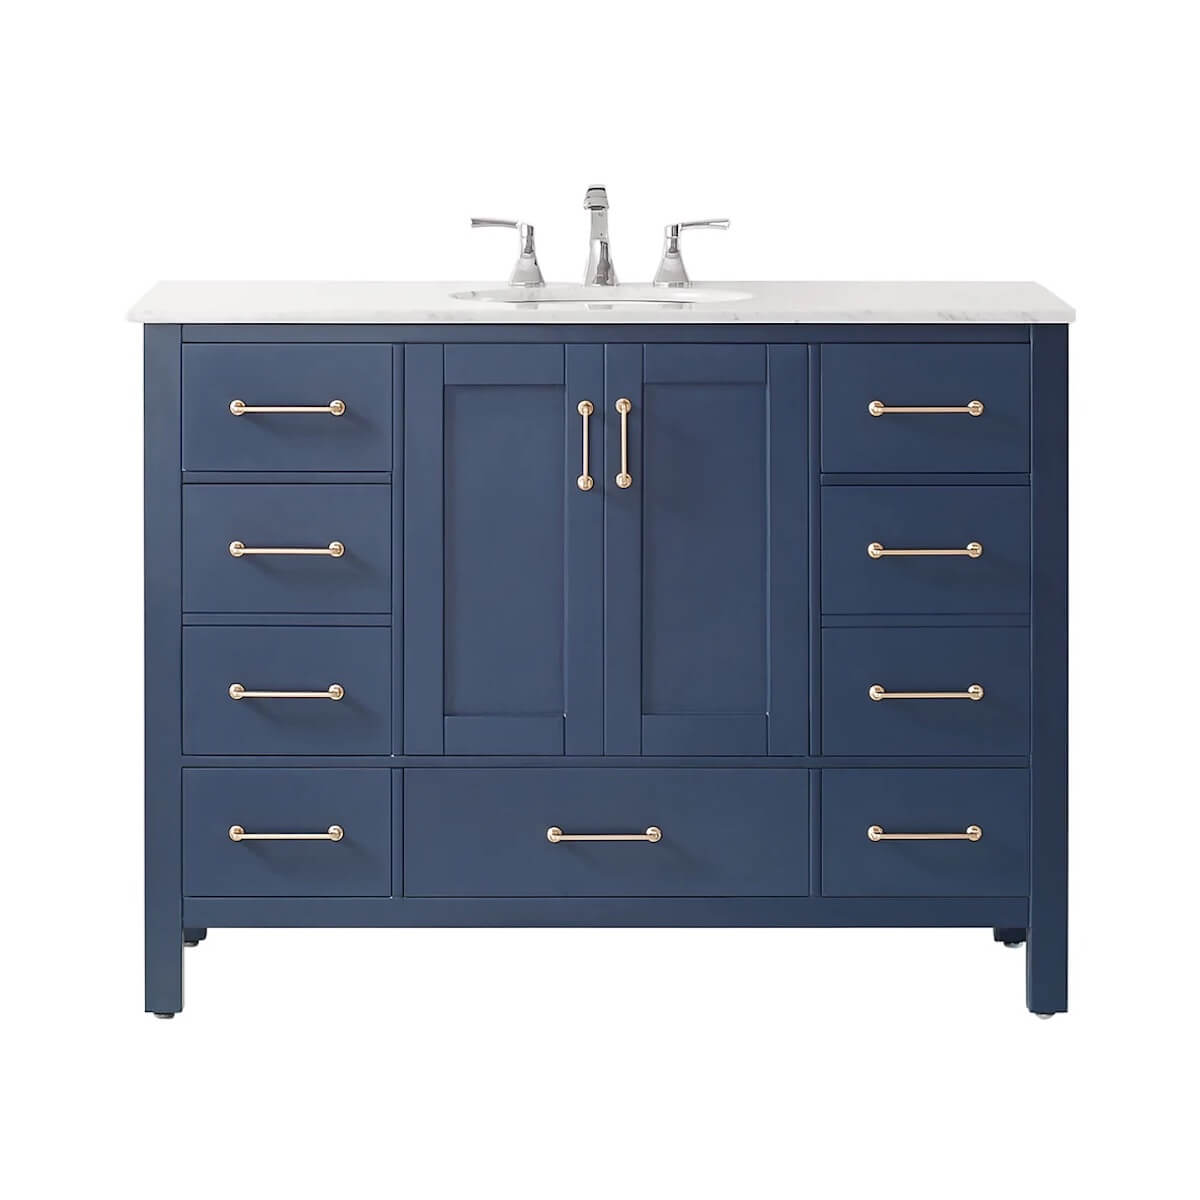 Vinnova 48” Gela Royal Blue Freestanding Single Vanity with Carrara White Marble Countertop Without Mirror 723048-RB-CA-NM